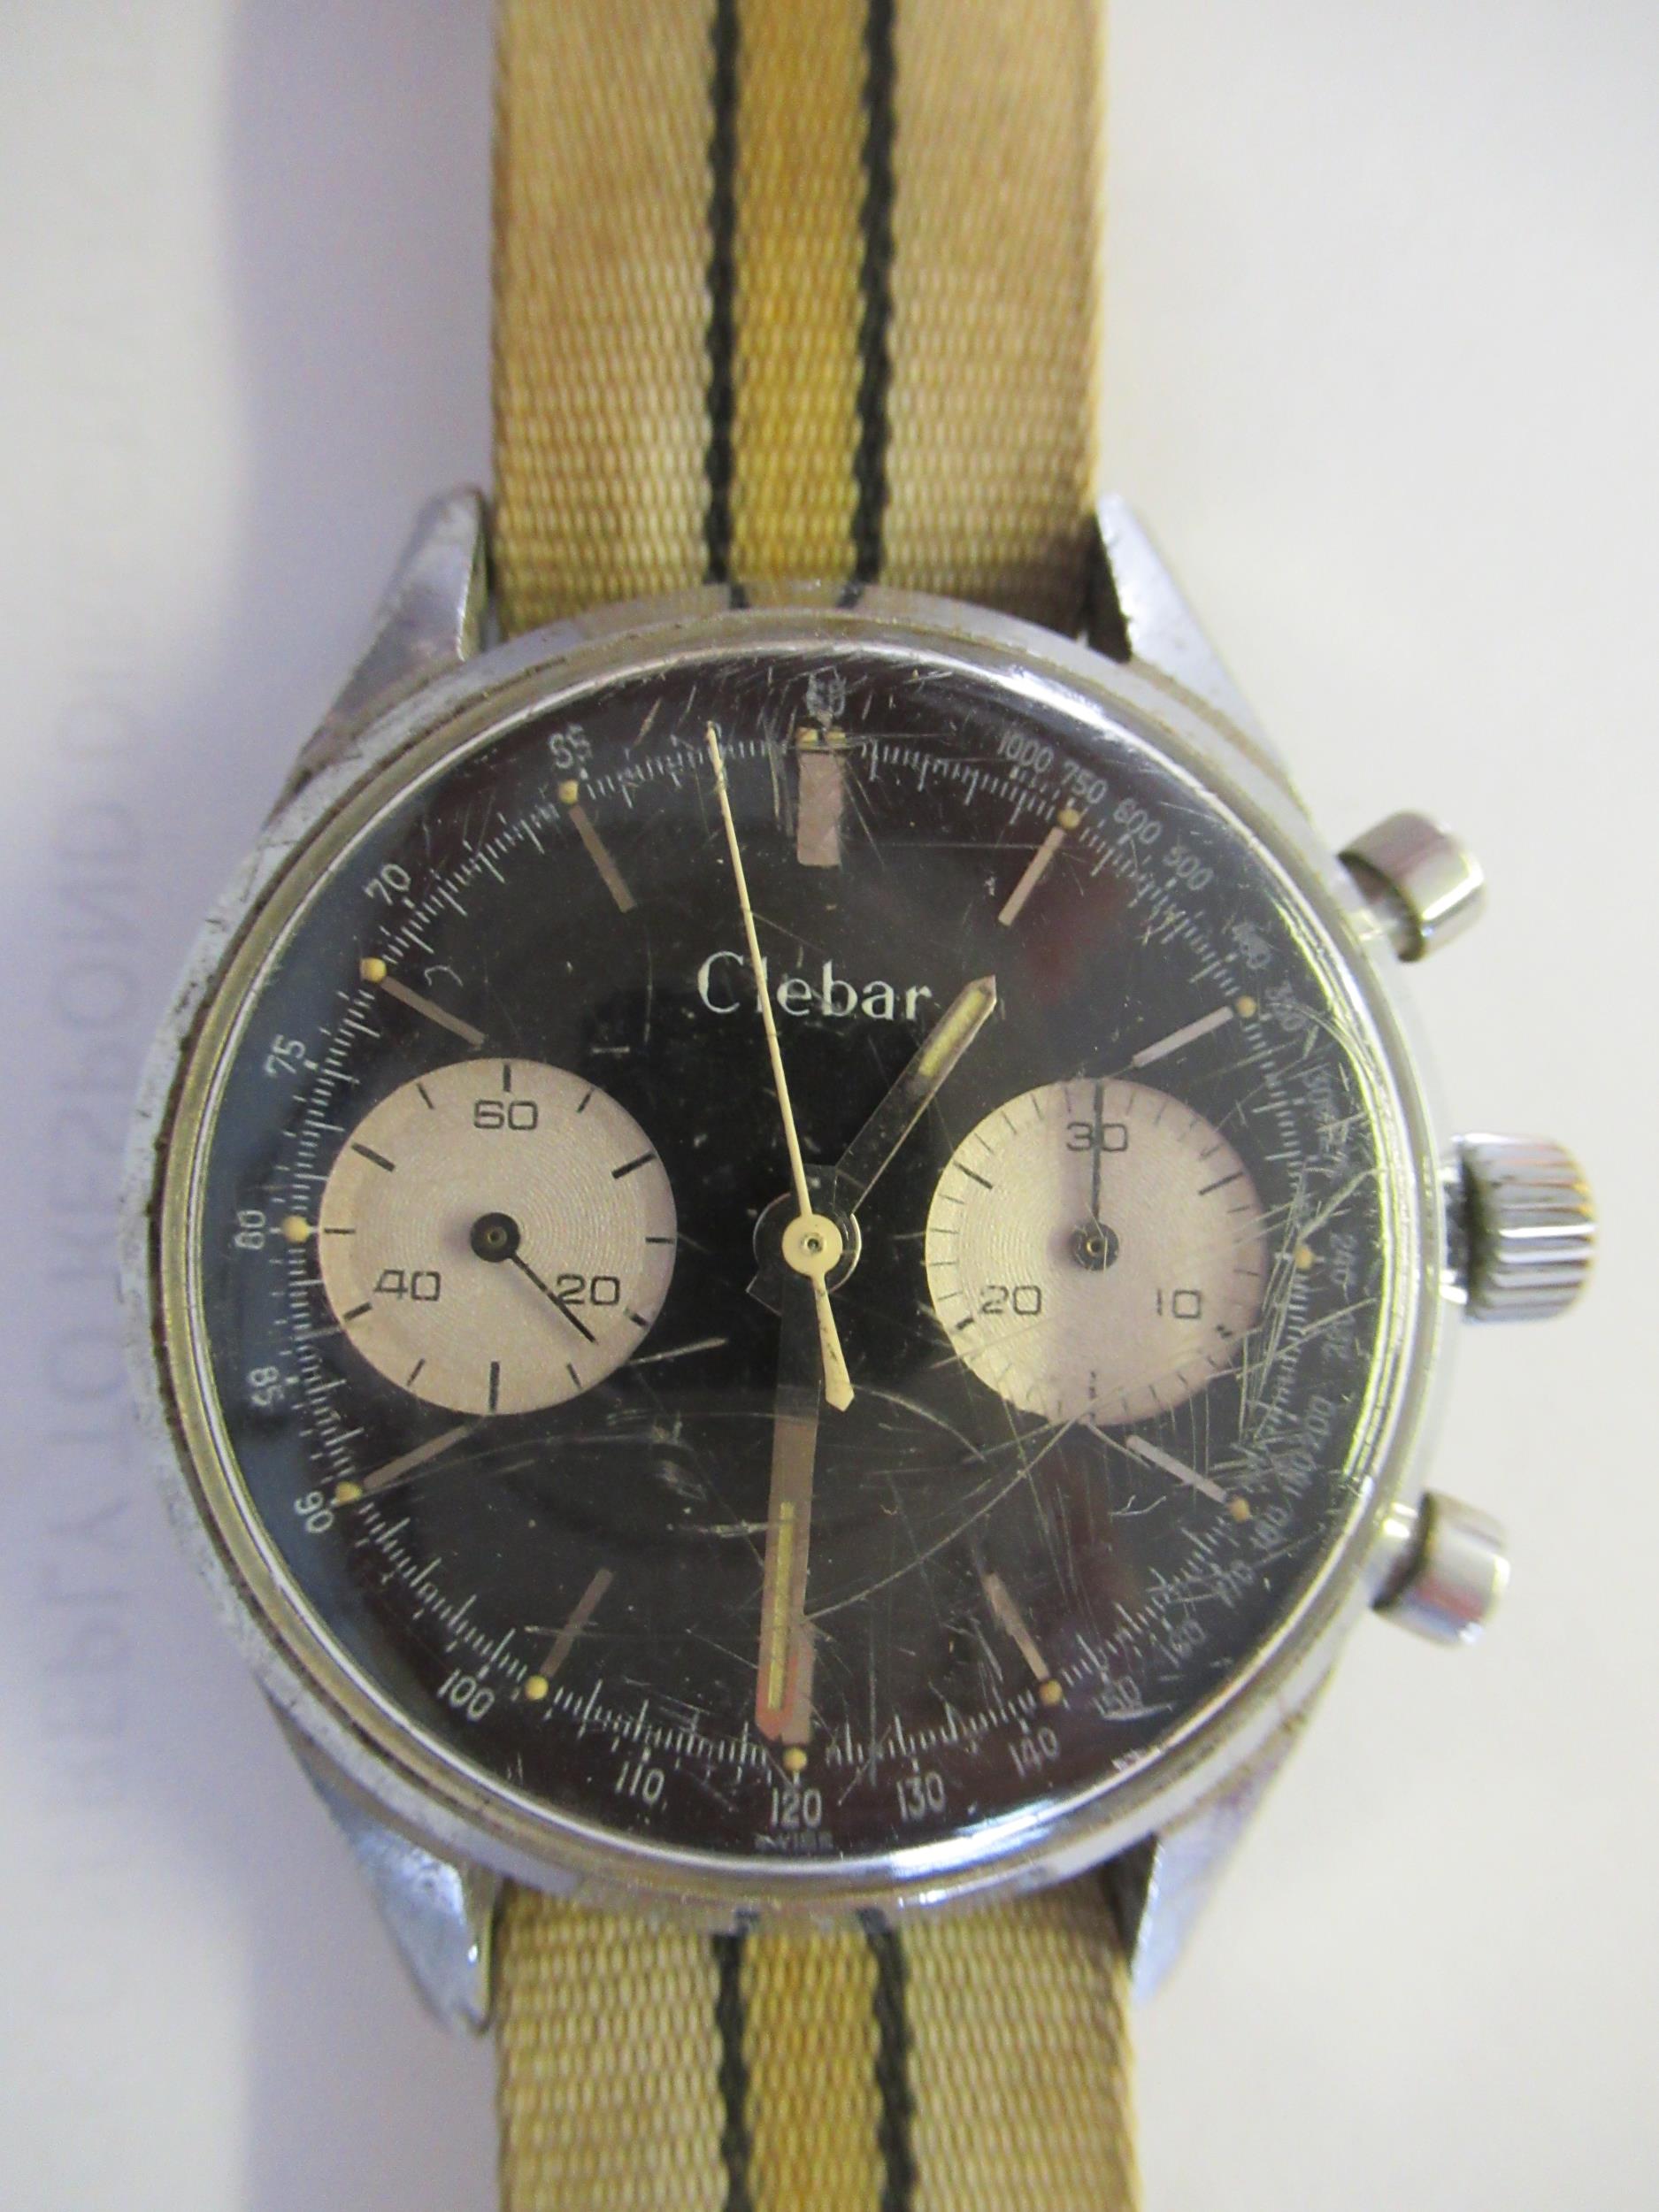 Gentleman's stainless steel cased chronograph wristwatch, the black dial with baton numerals and - Image 2 of 6